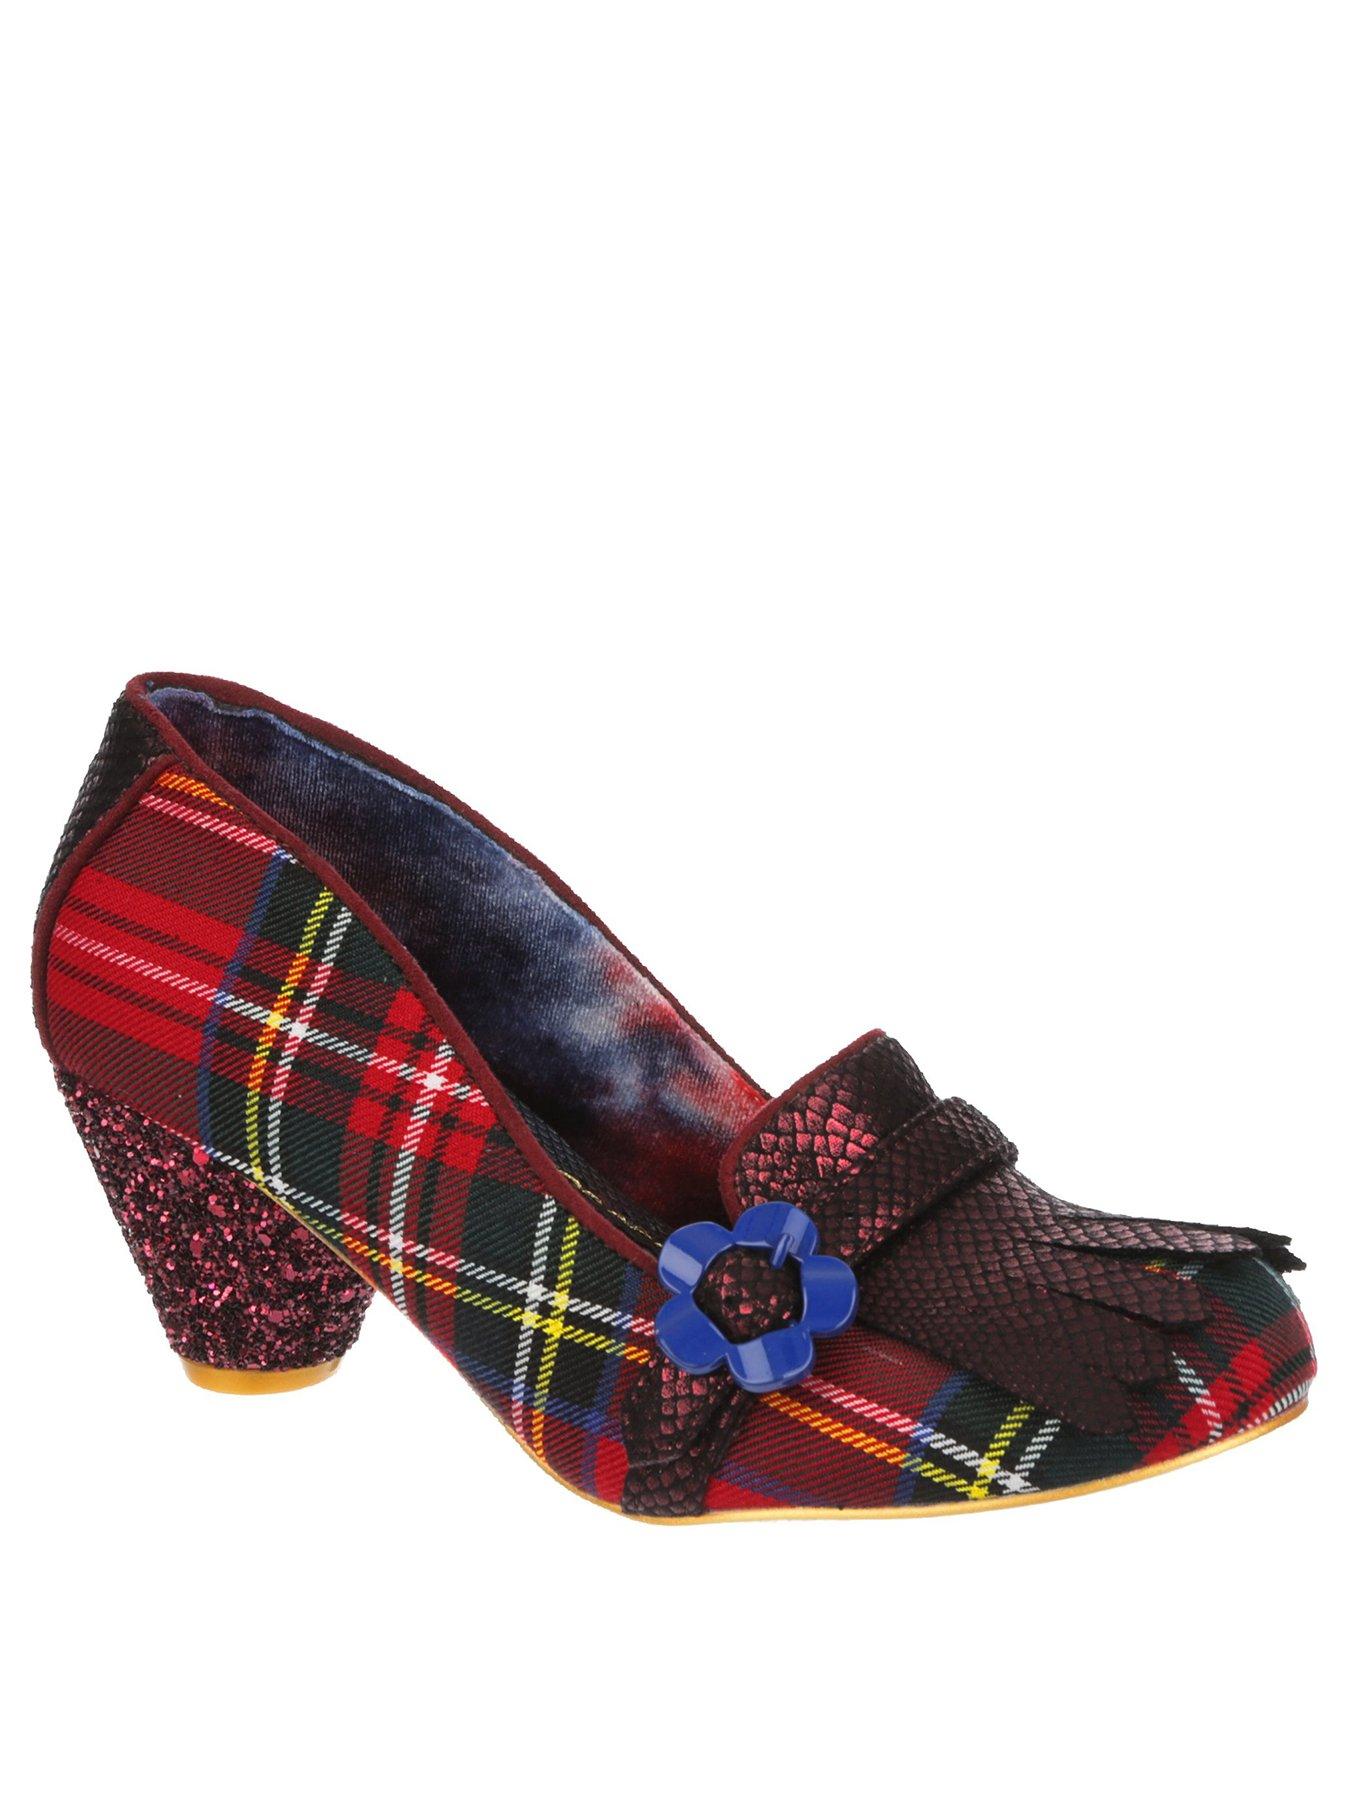 Low Heel Shoes Irregular Choice /'Frozen In Time Kitty/' Loafers Brogues Flat